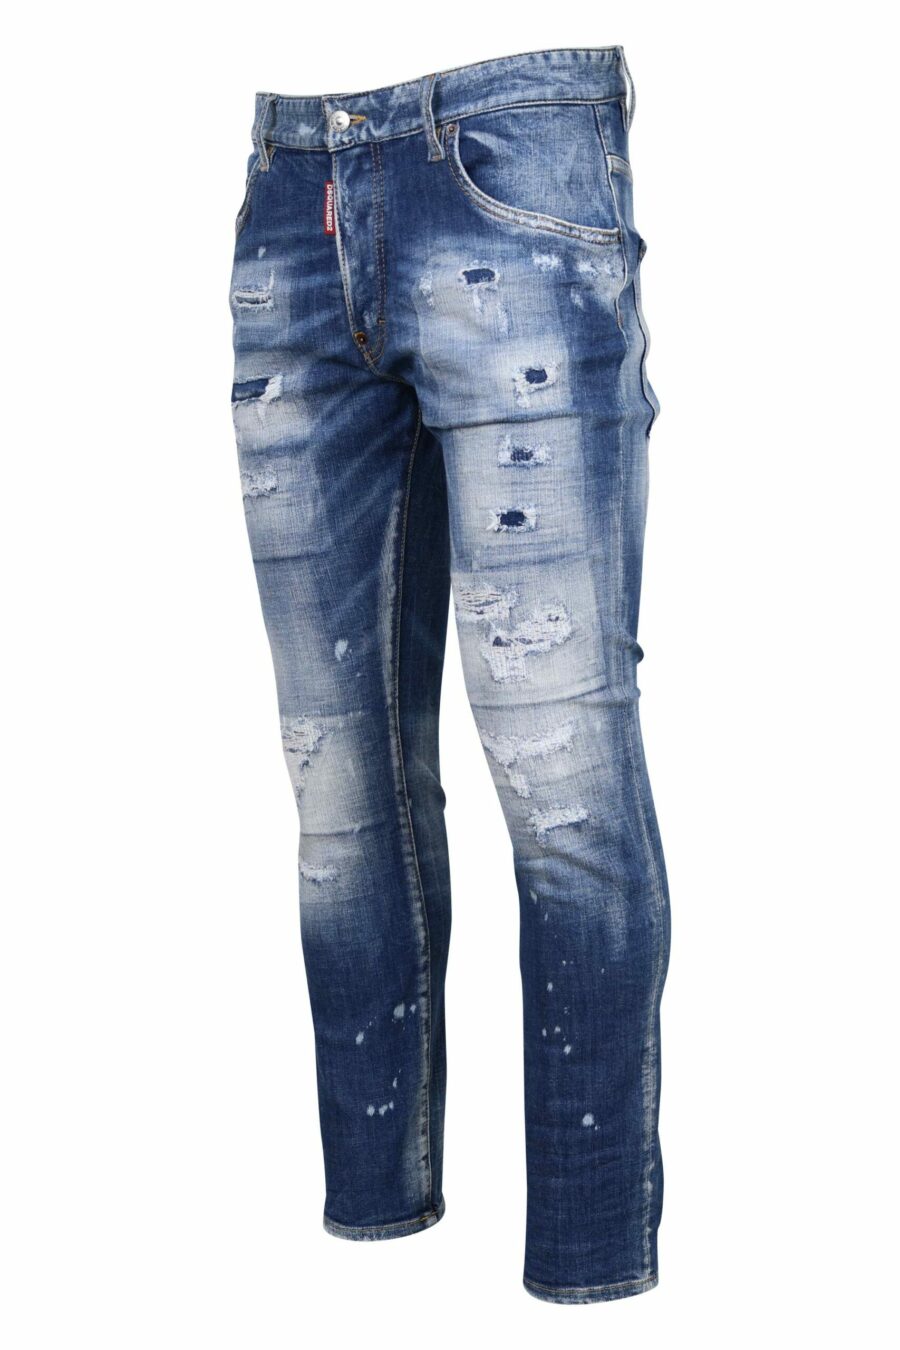 Light blue jeans "skater jean" with rips and frayed - 8054148338848 1 scaled